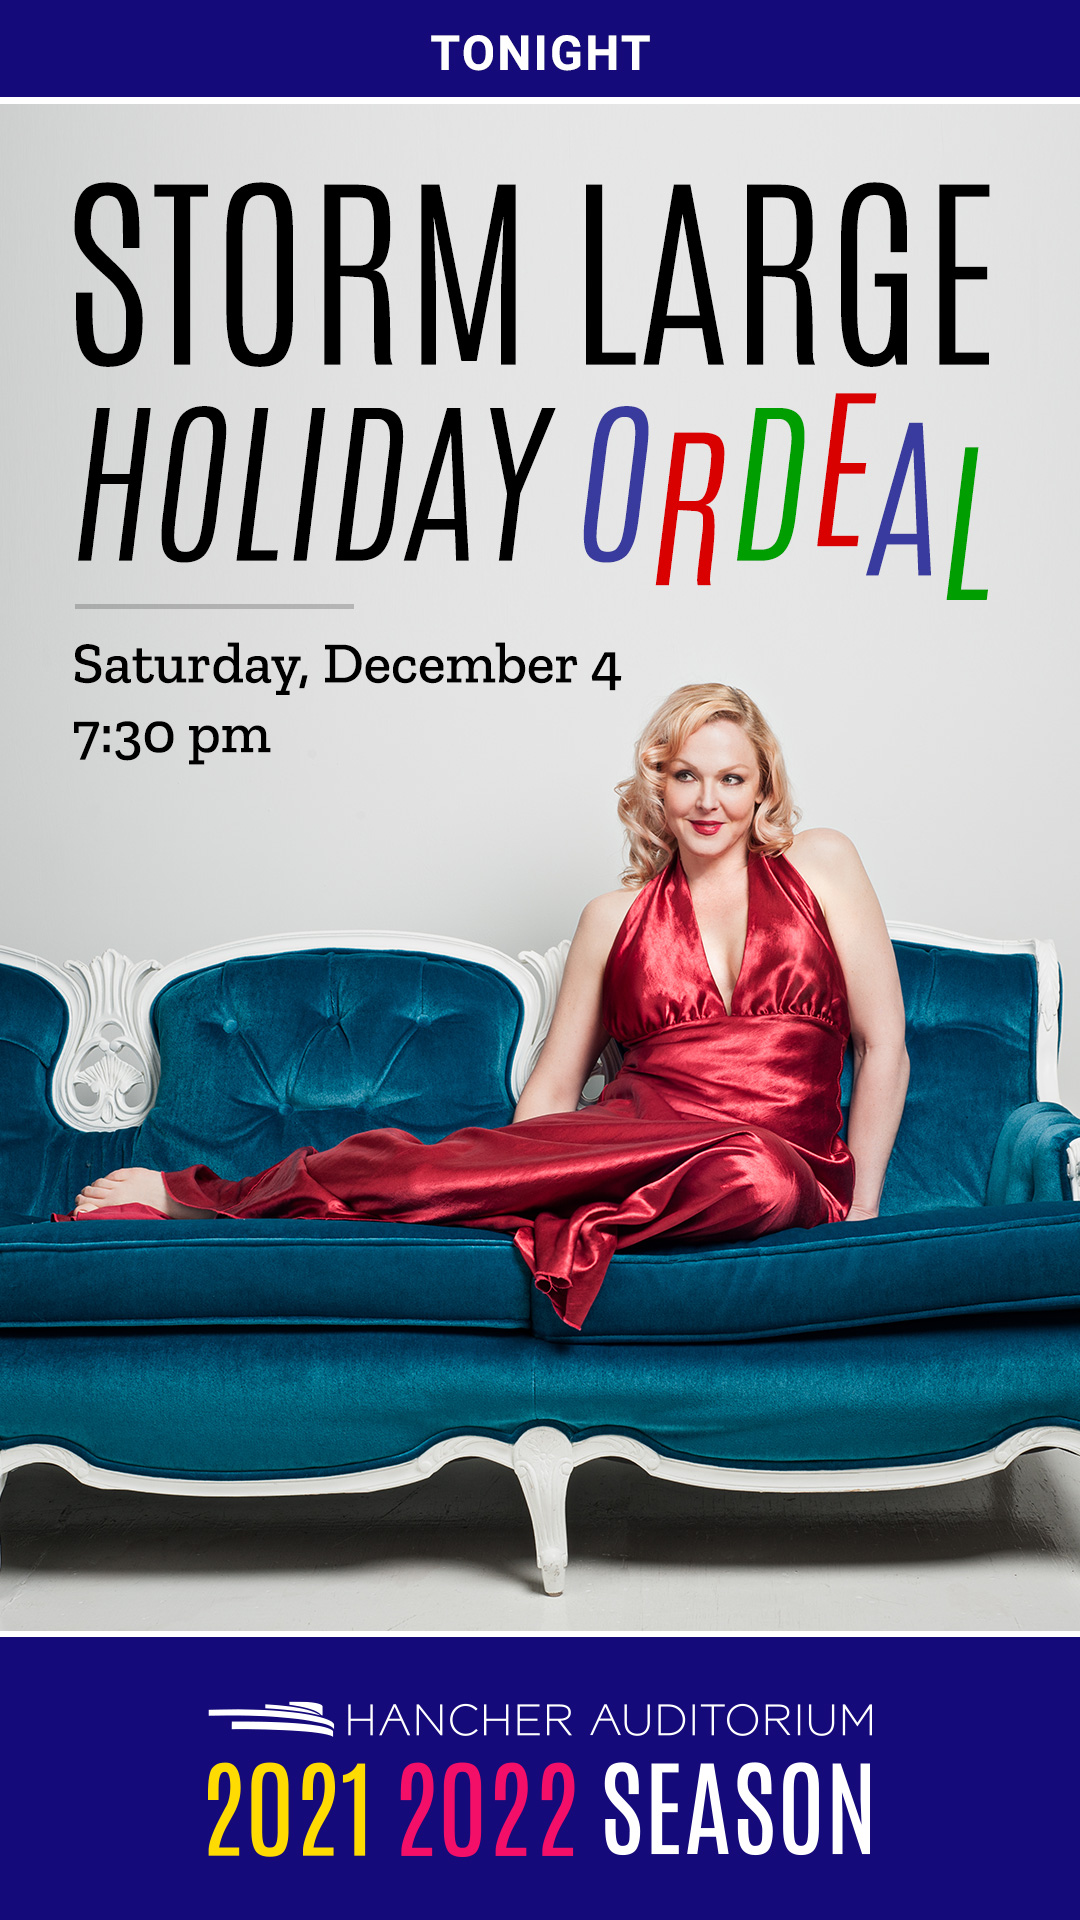 Storm Large, "Holiday Ordeal" - Tonight